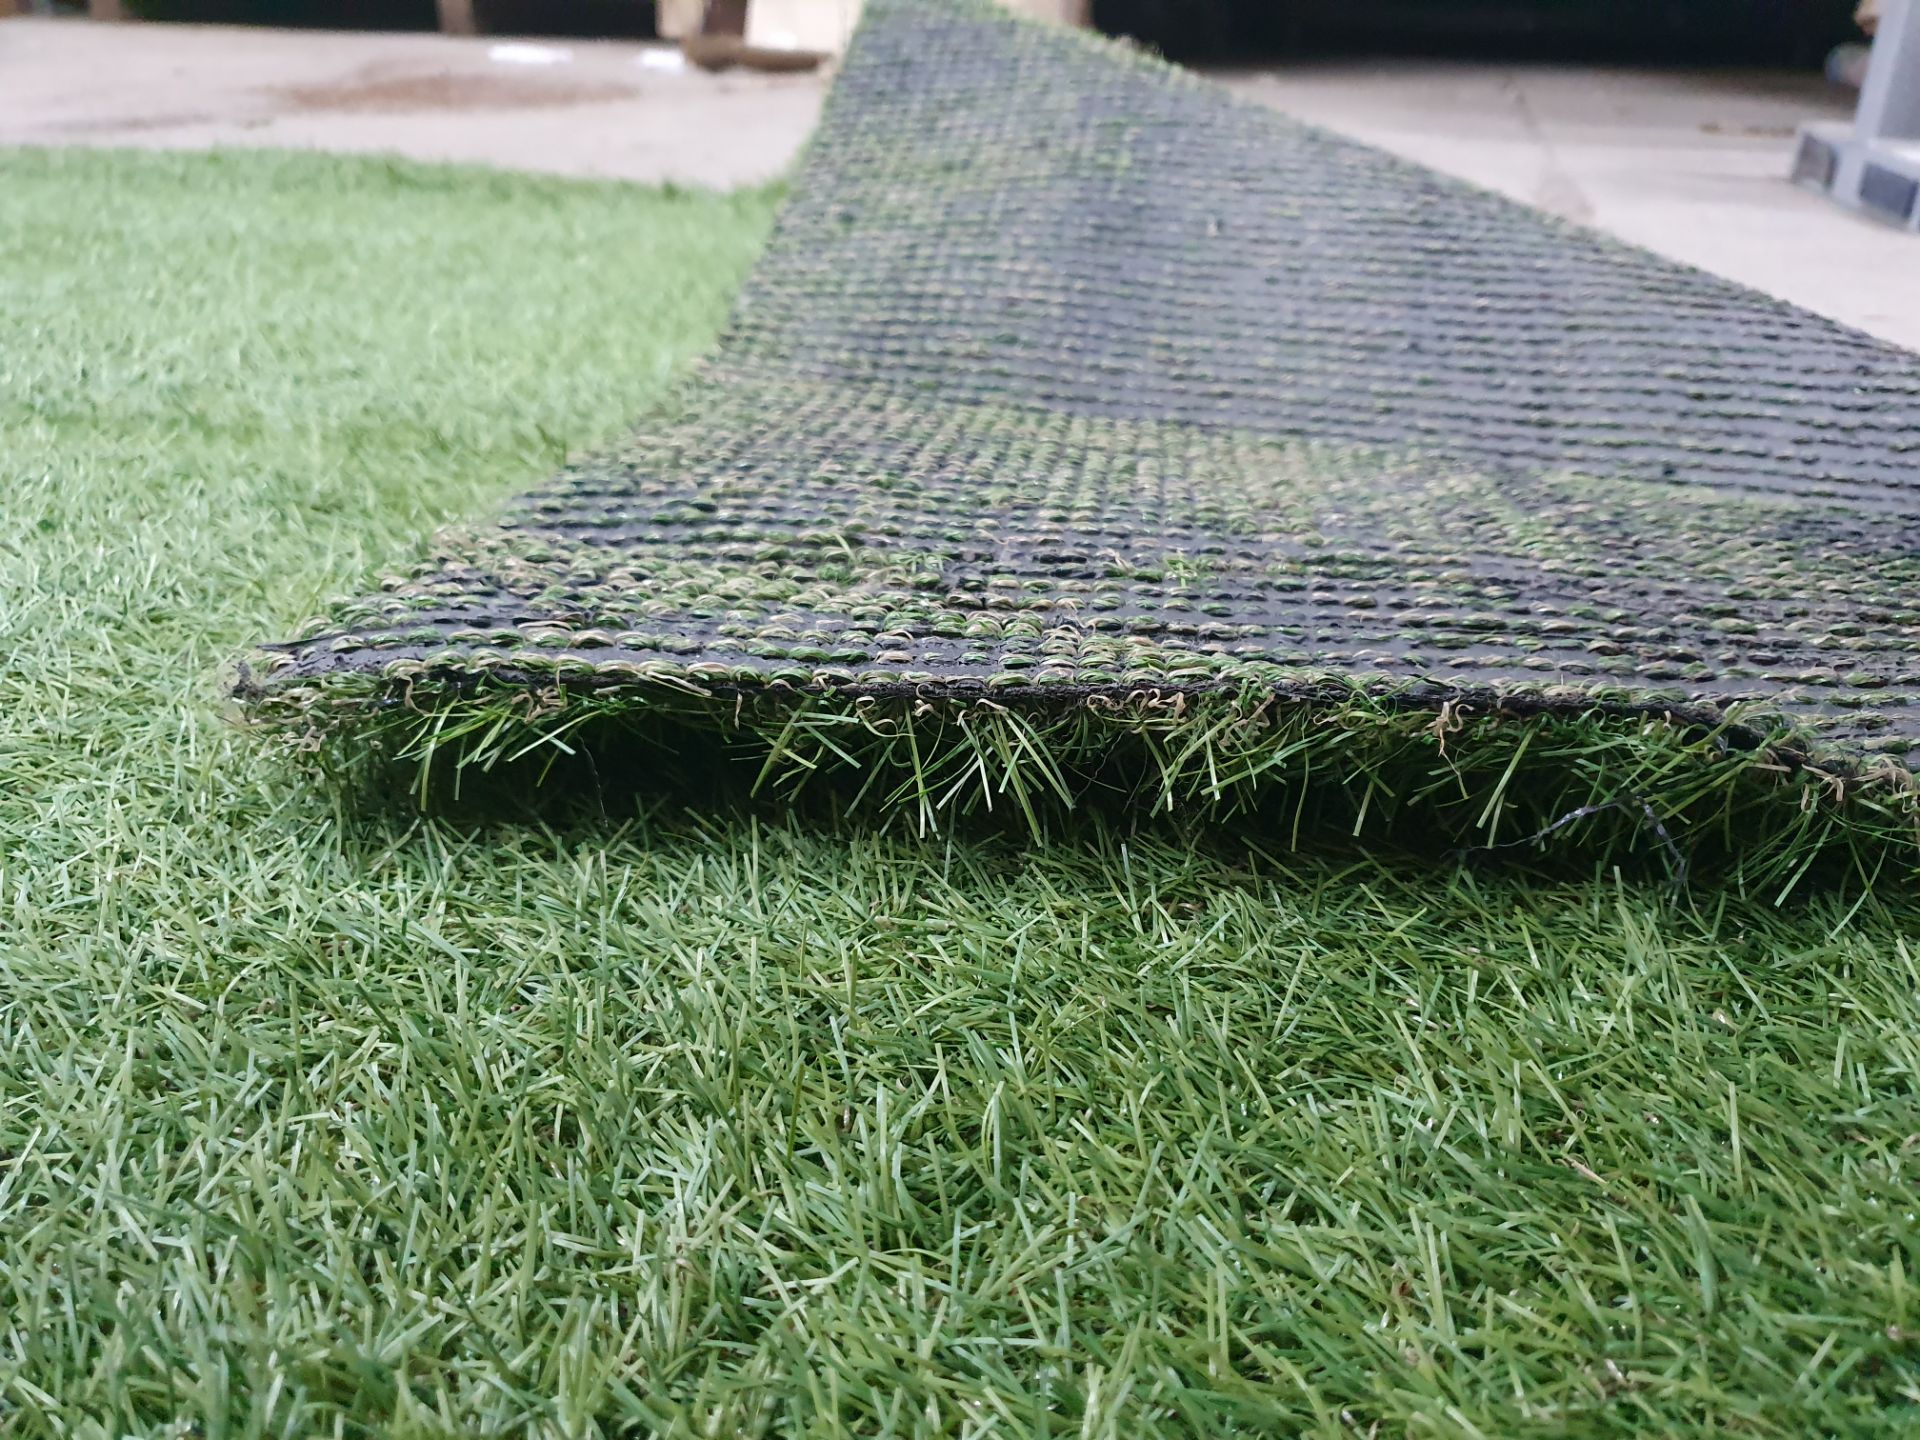 Roll of Green Artificial Grass | Approximate size: 3.5m x 4m - Image 4 of 6